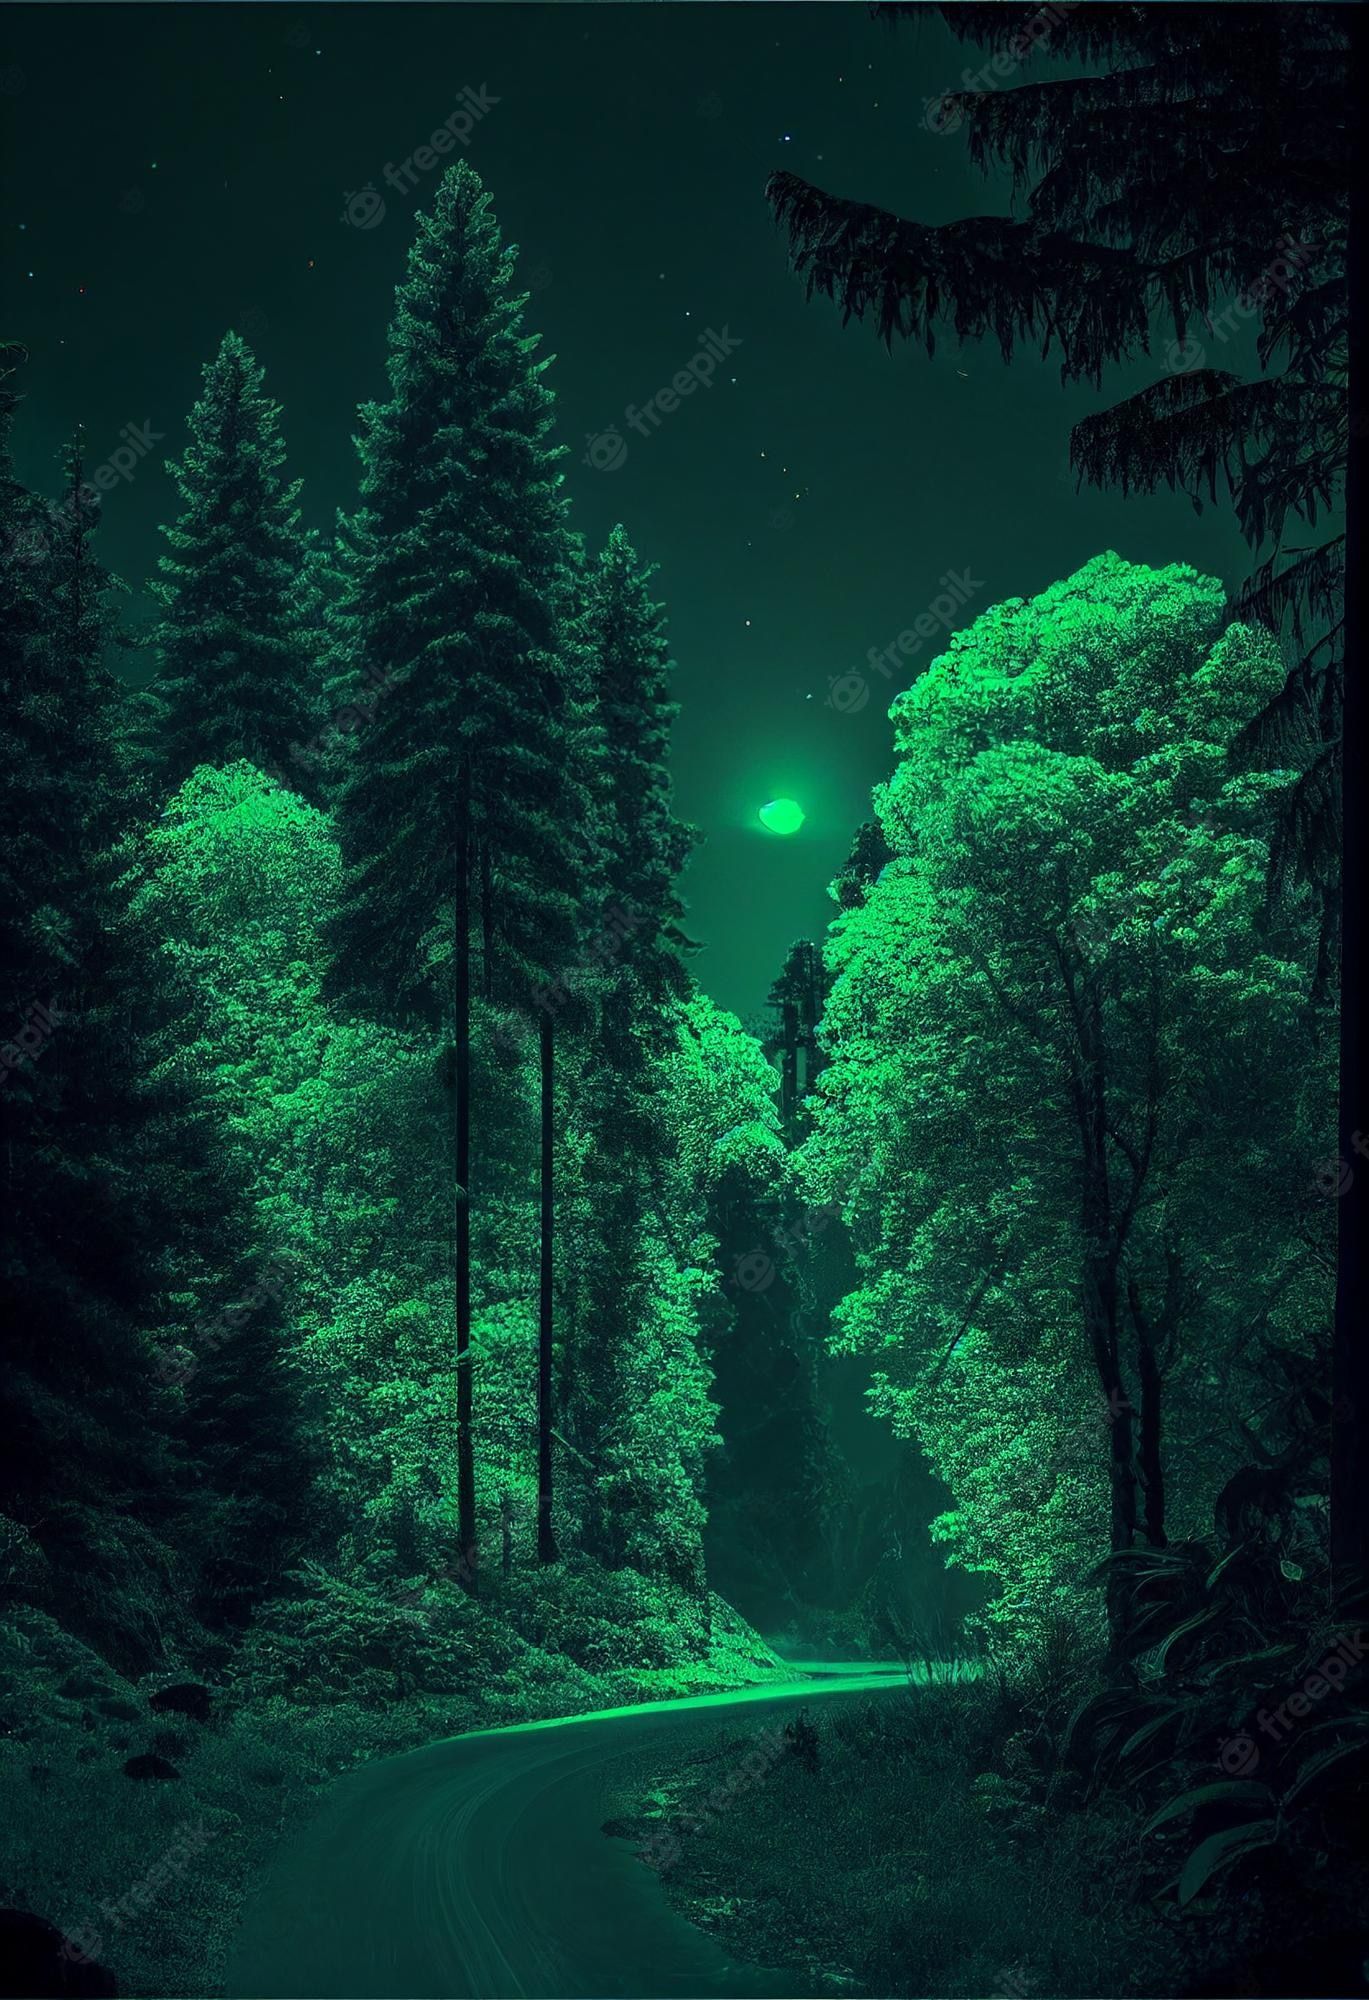 A forest at night with a full moon - Green, landscape, forest